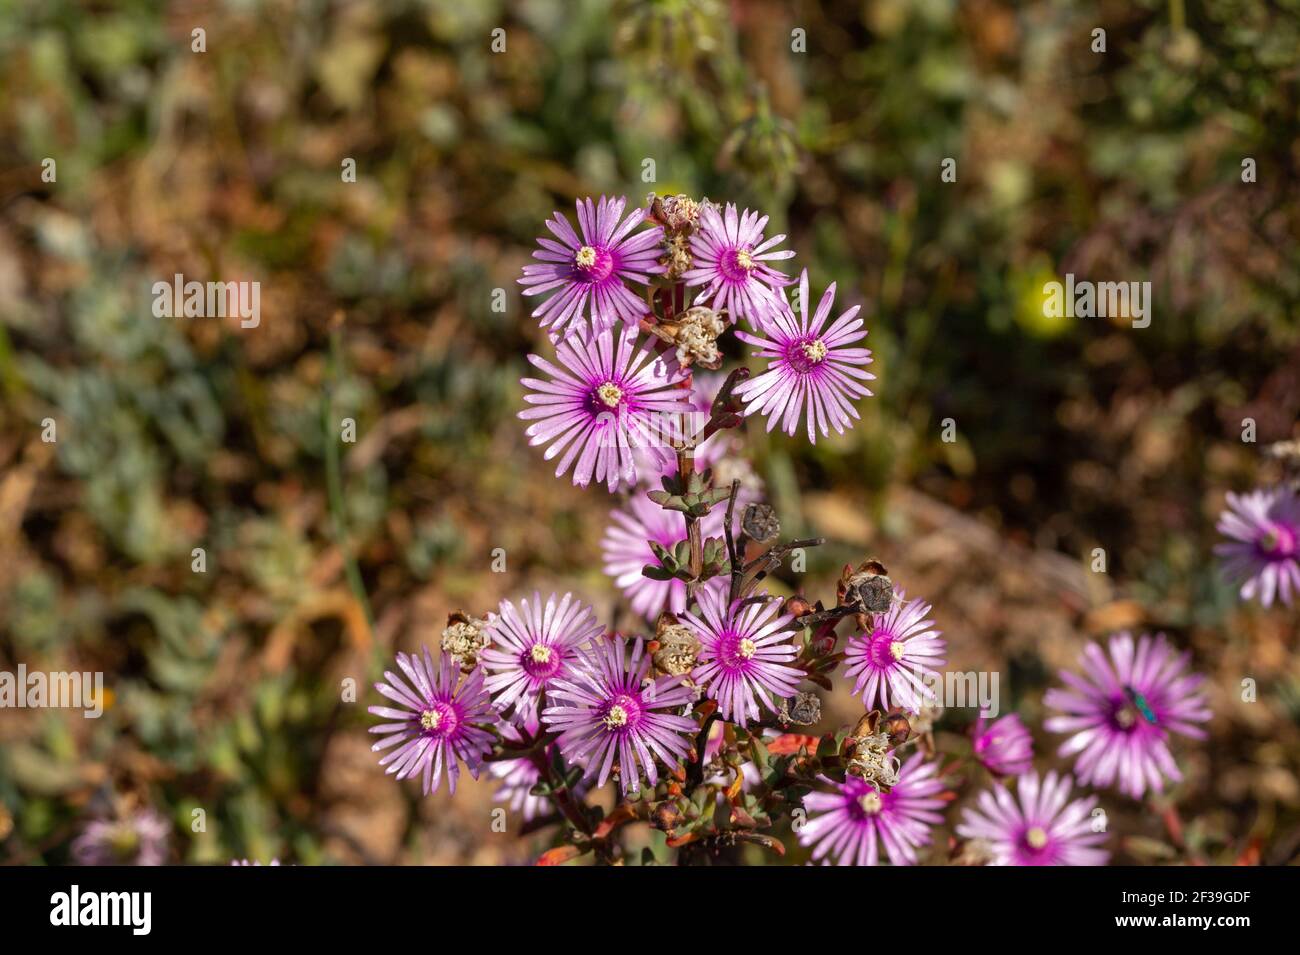 The violet pink flowers of Lampranthus leptaleon (a member of the fig-marigold family) seen in natural habitat close to Darling in South Africa Stock Photo